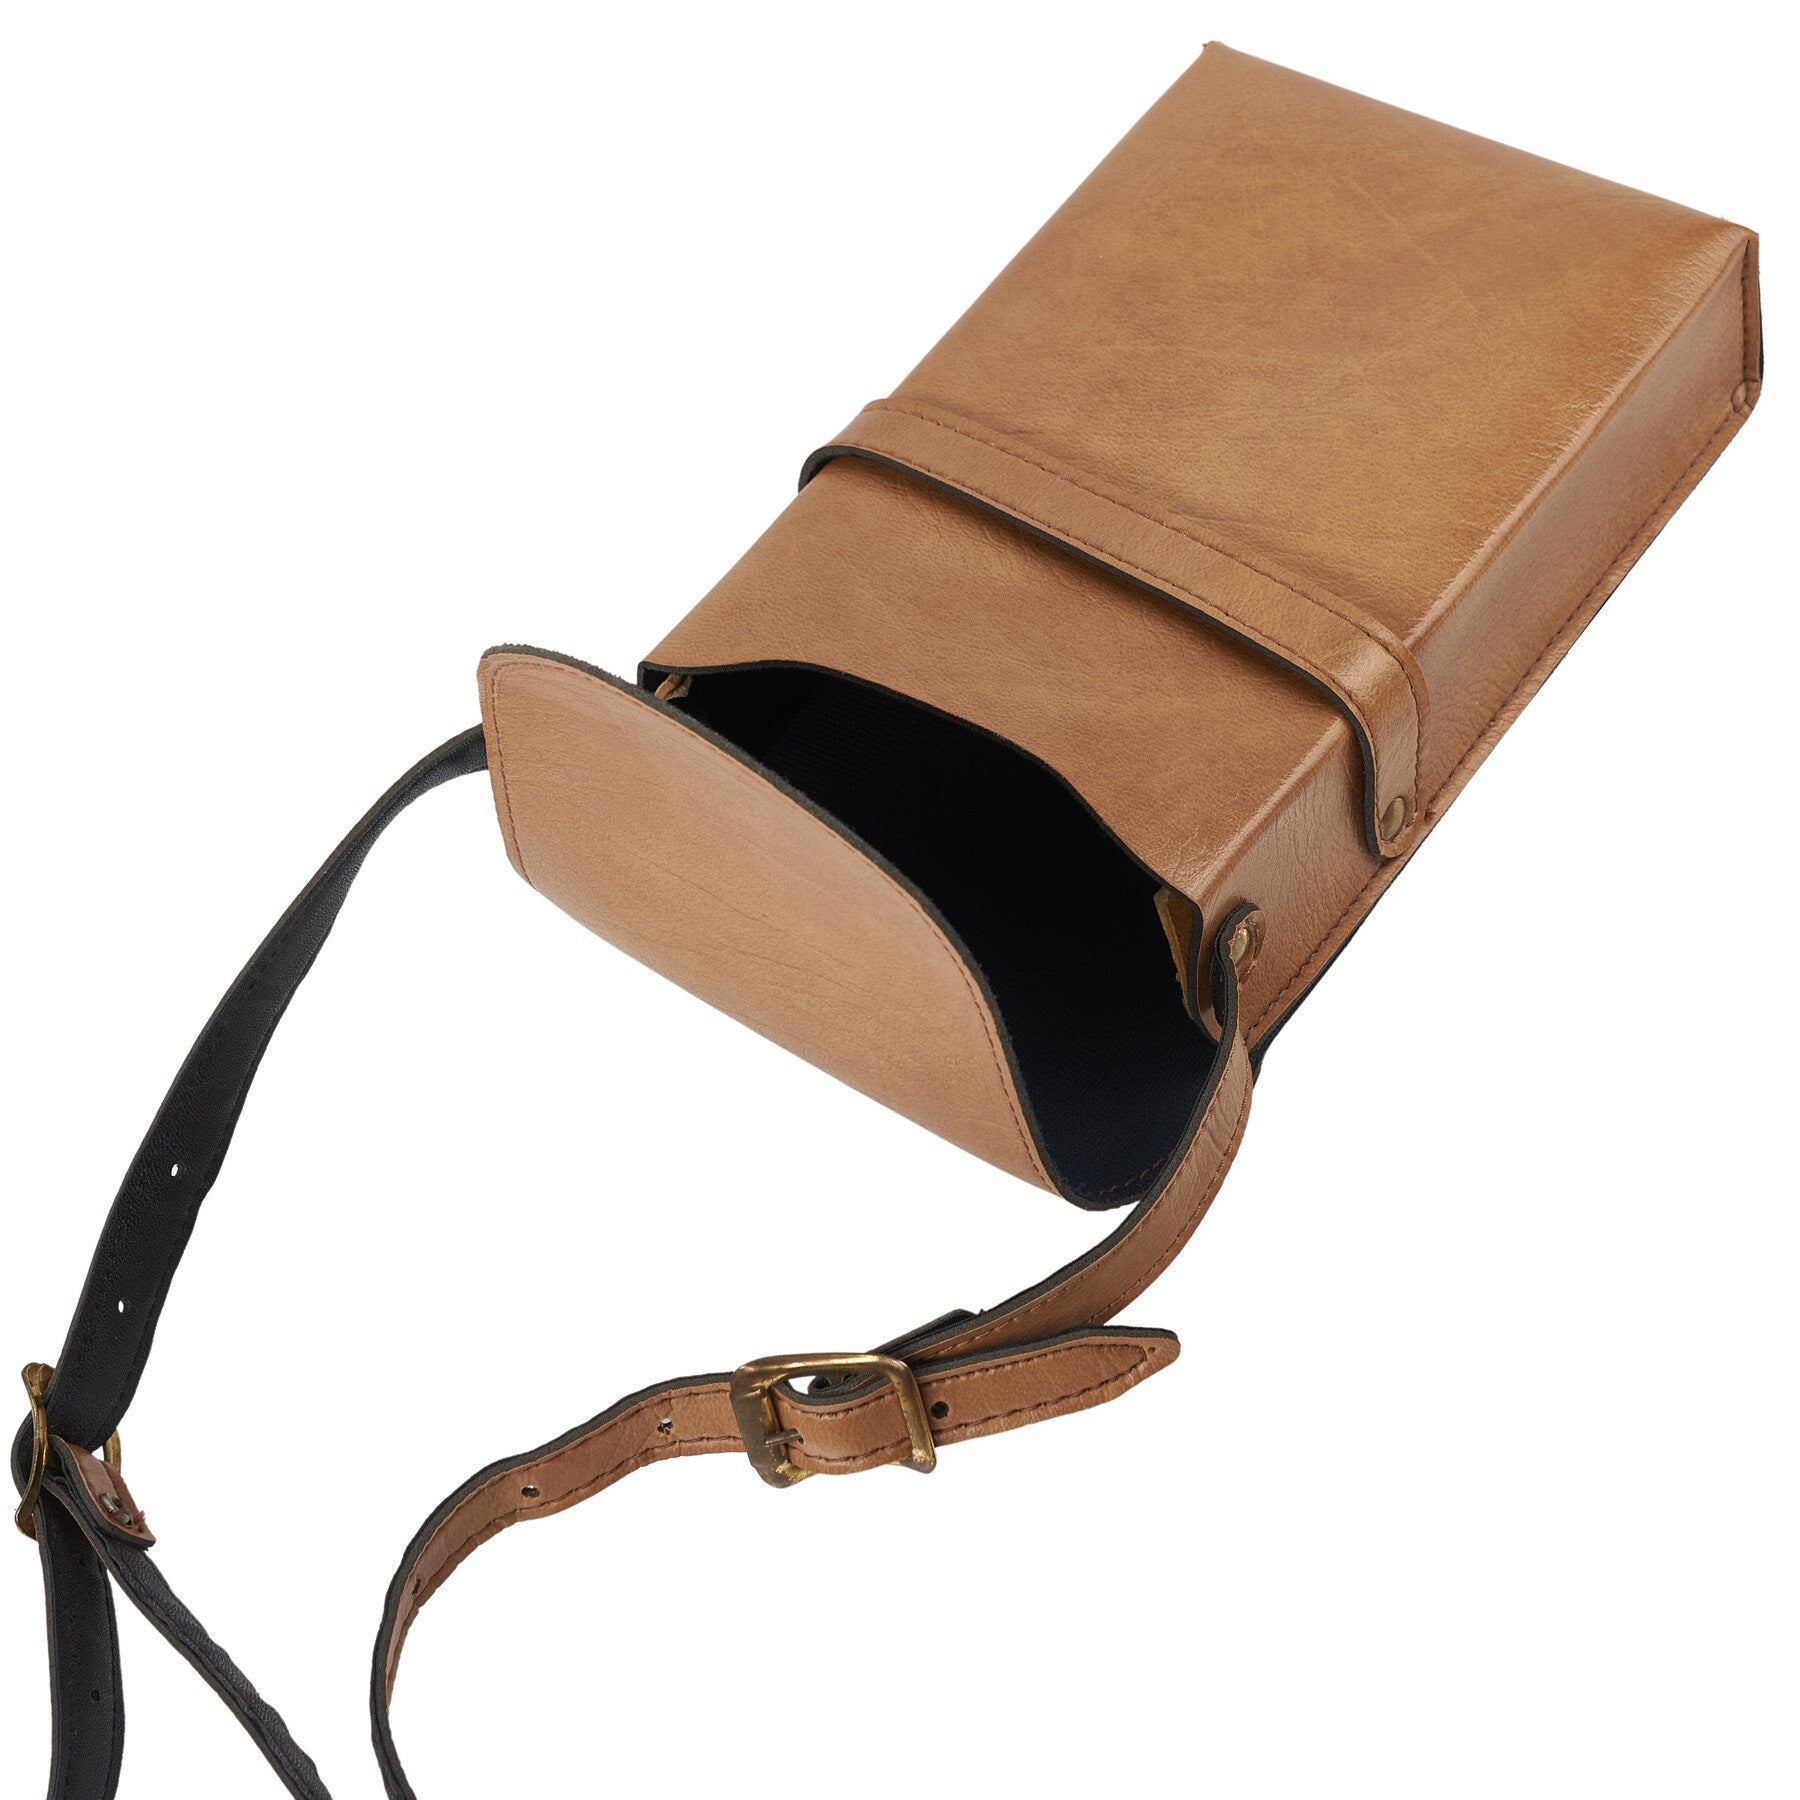 Polaroid Vintage Leather Bag with strap for Polaroid SX-70 Camera - Vintage Polaroid Instant Cameras